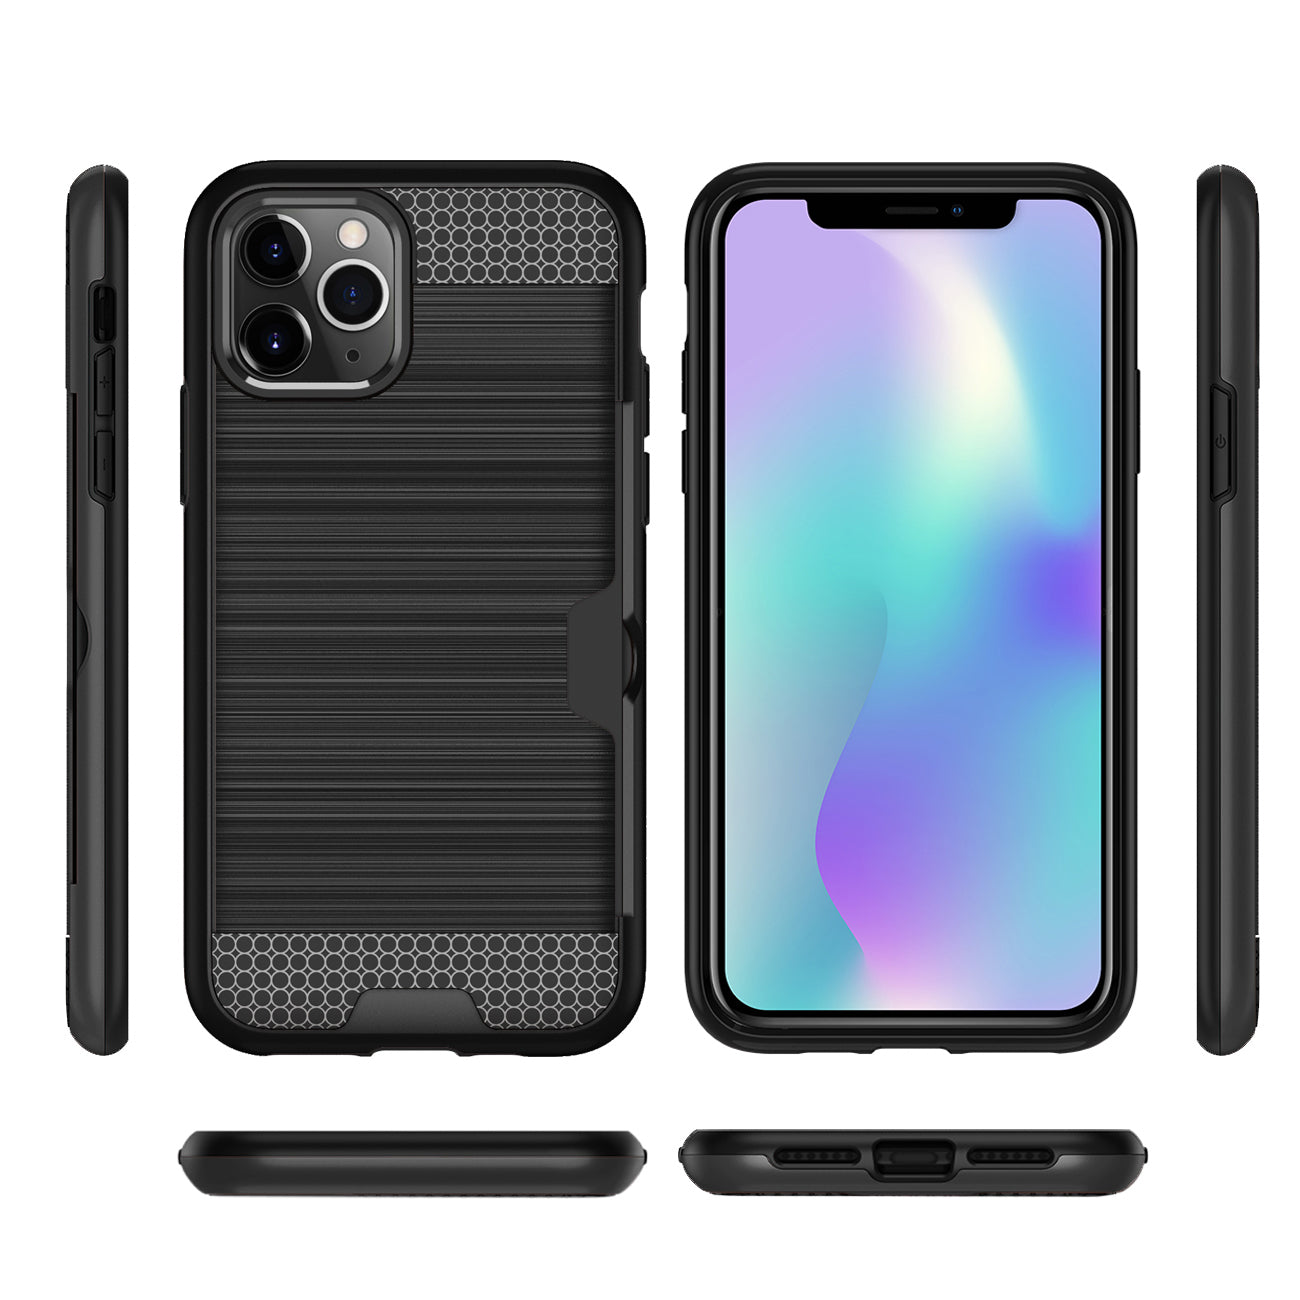 Case Hybrid Slim Armor With Card Holder iPhone 11 Pro Max Black Color